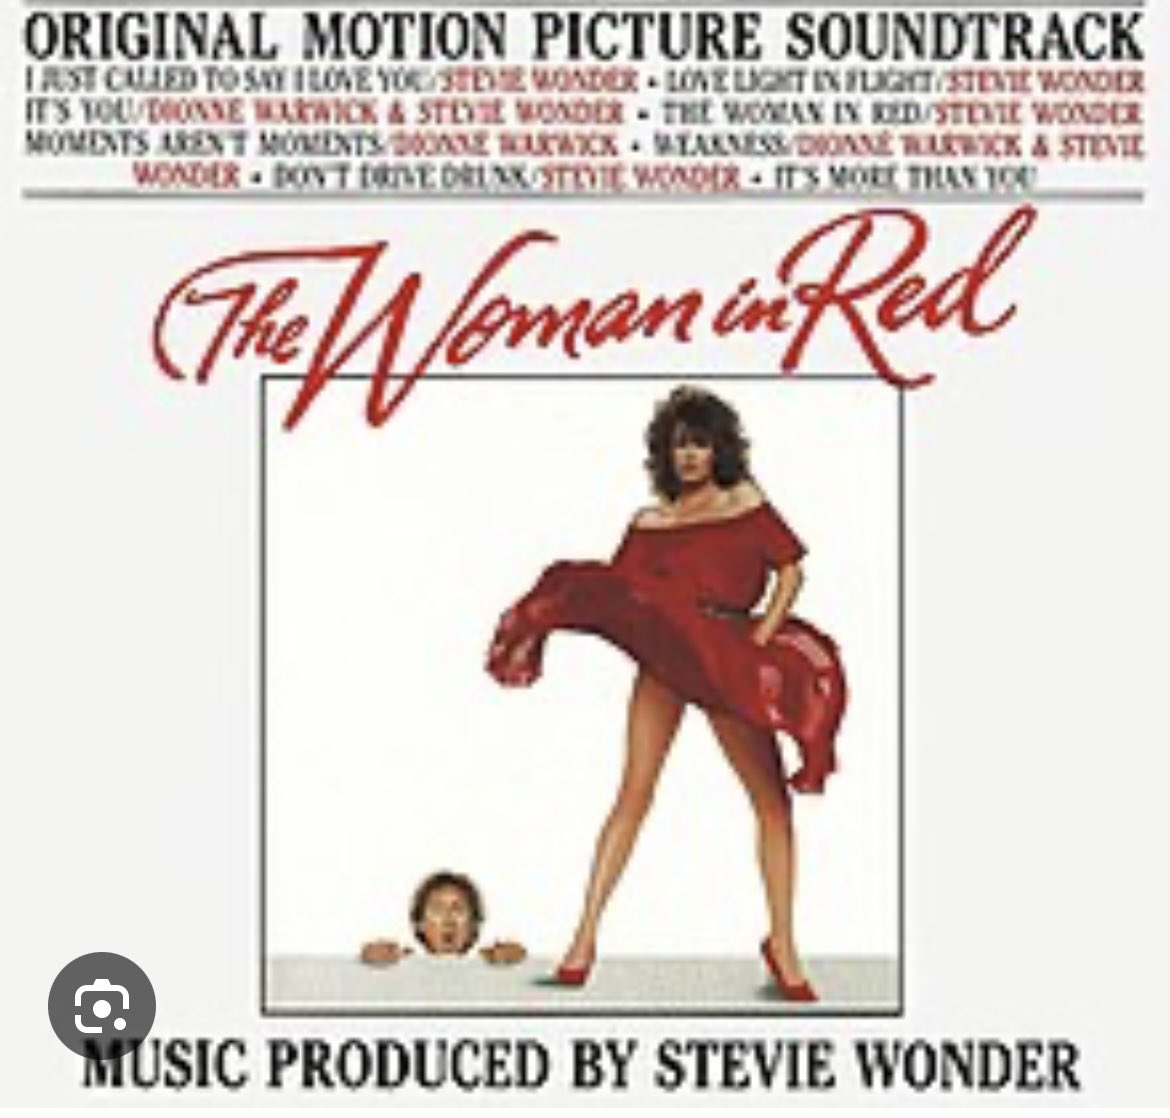 One of the funniest movies and favorite soundtracks from Stevie Wonder ft. Ms. Dionne Warwick “Weakness” “Love Light In Flight” “It’s You” “ Moments Aren’t Moments” 🤩 Fabulous! #DionneWarwick #RockandRollHallOfFame #StevieWonder